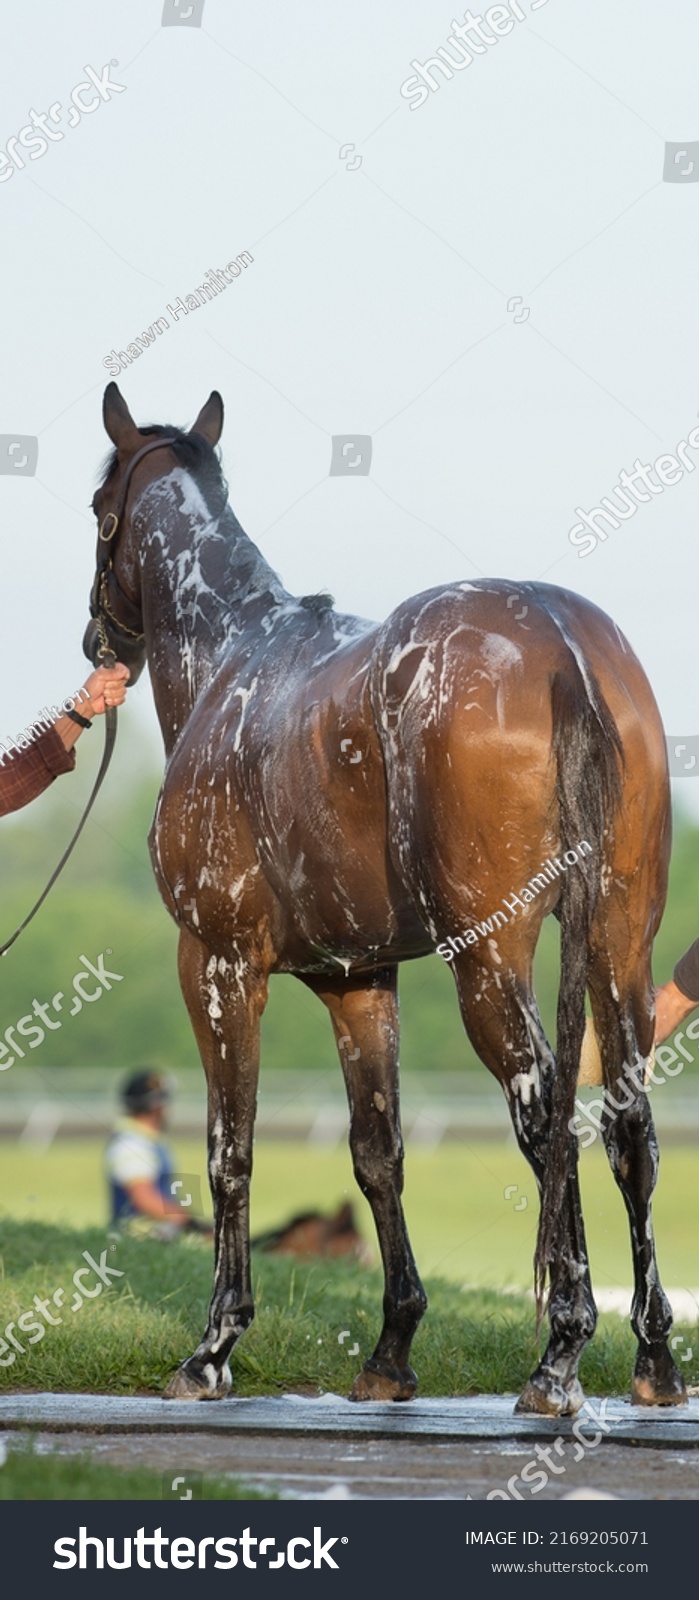 full body of thoroughbred horse being shampooed and bathed shampoo suds on back and legs water dripping horse standing on rubber mat in outdoor washing area at racetrack Kentucky  vertical format  #2169205071